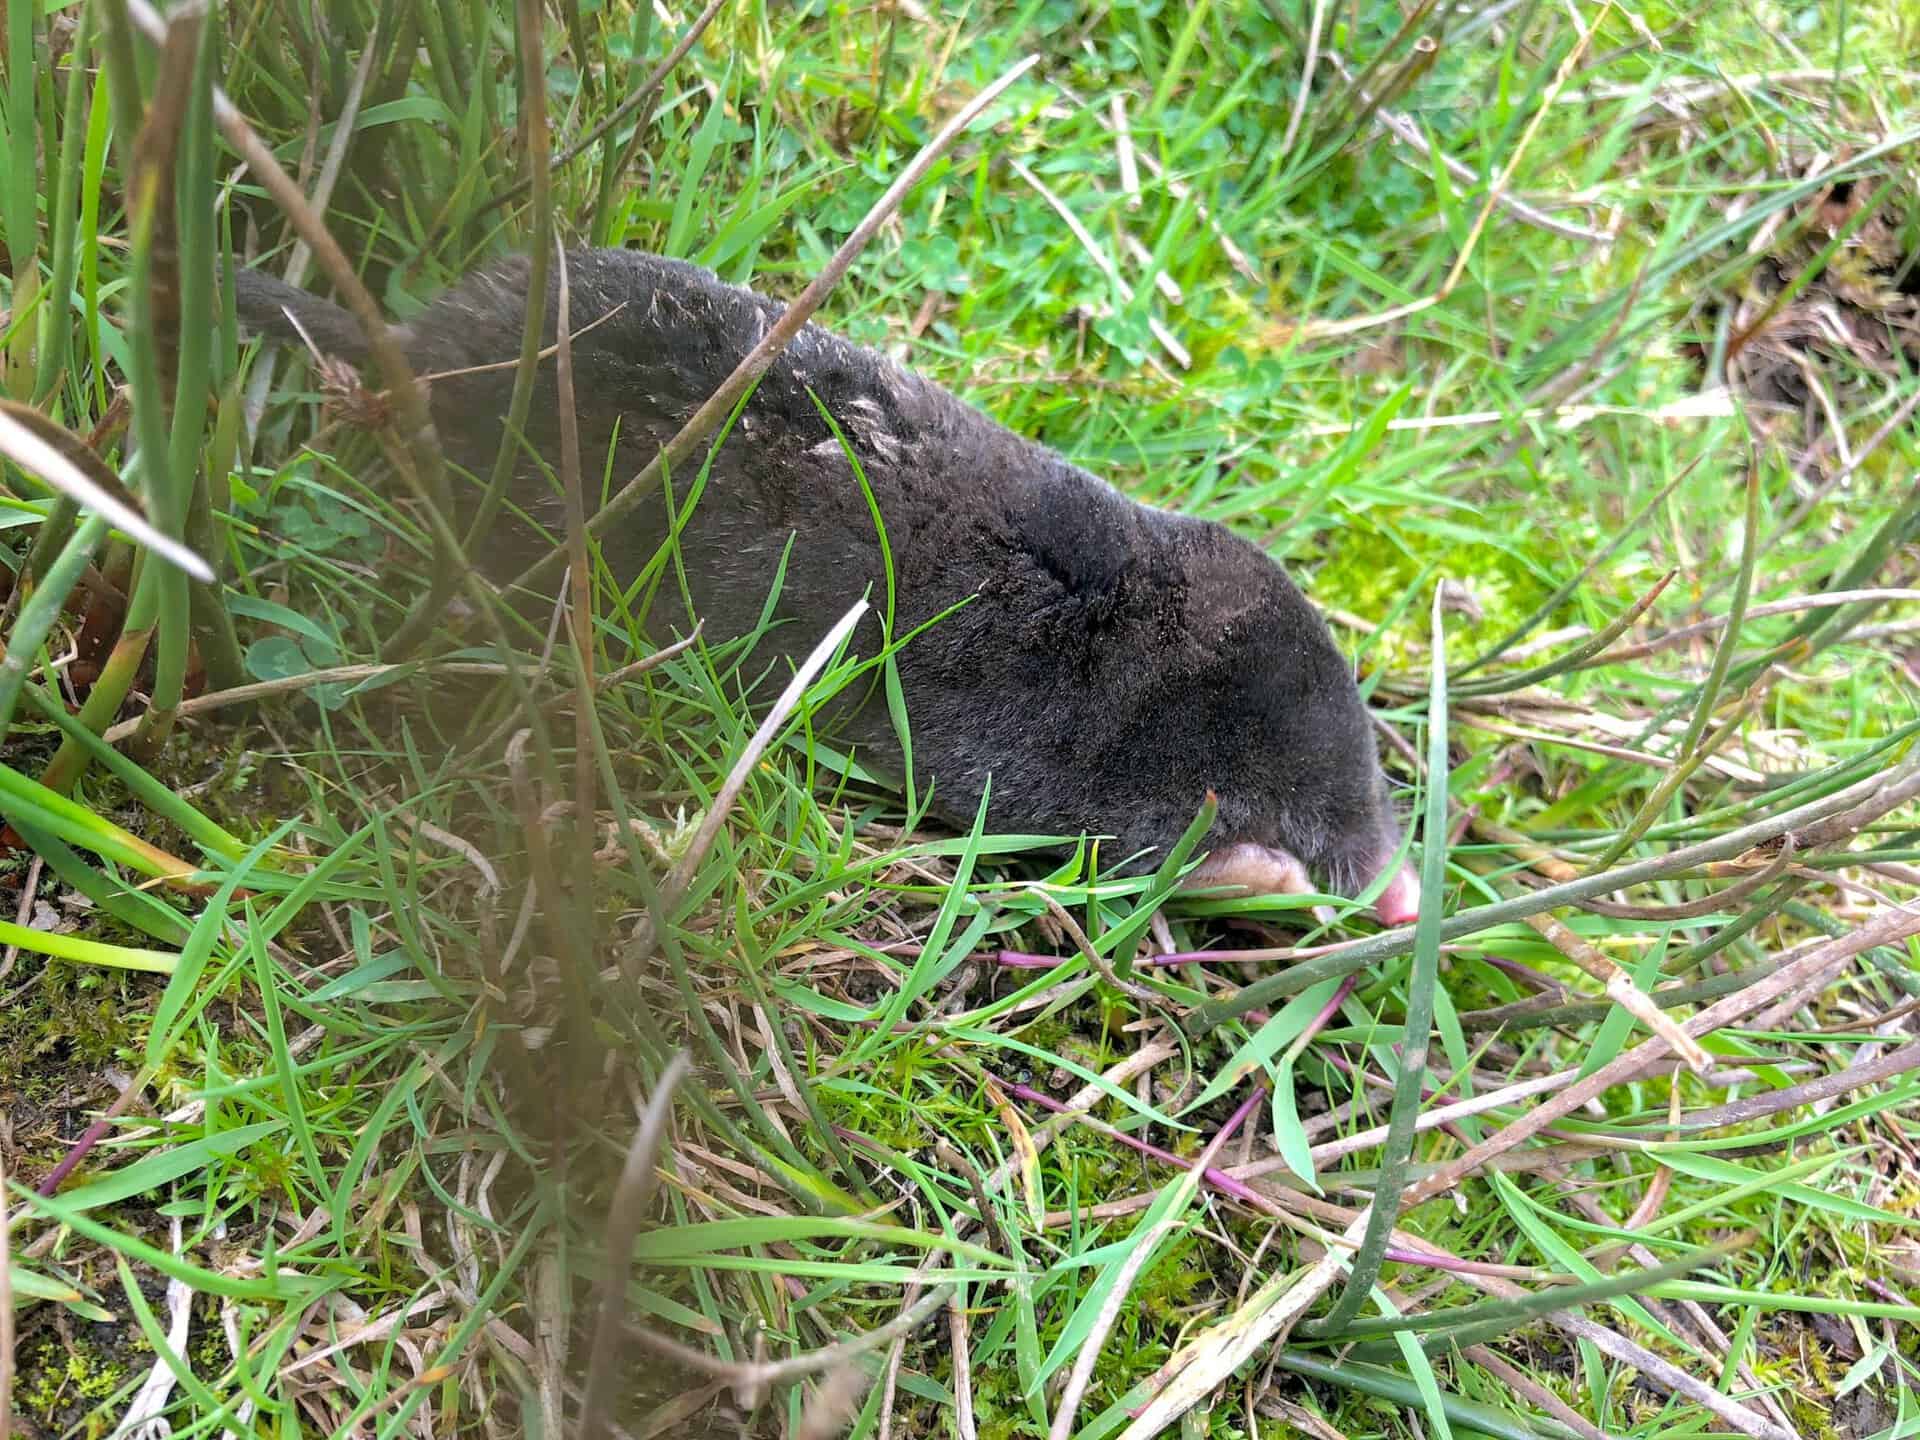 A rare sighting as this little creature scurried across the path. Moles are common in Britain but spend almost their entire life underground. It's the first time I have ever seen one alive in the wild.